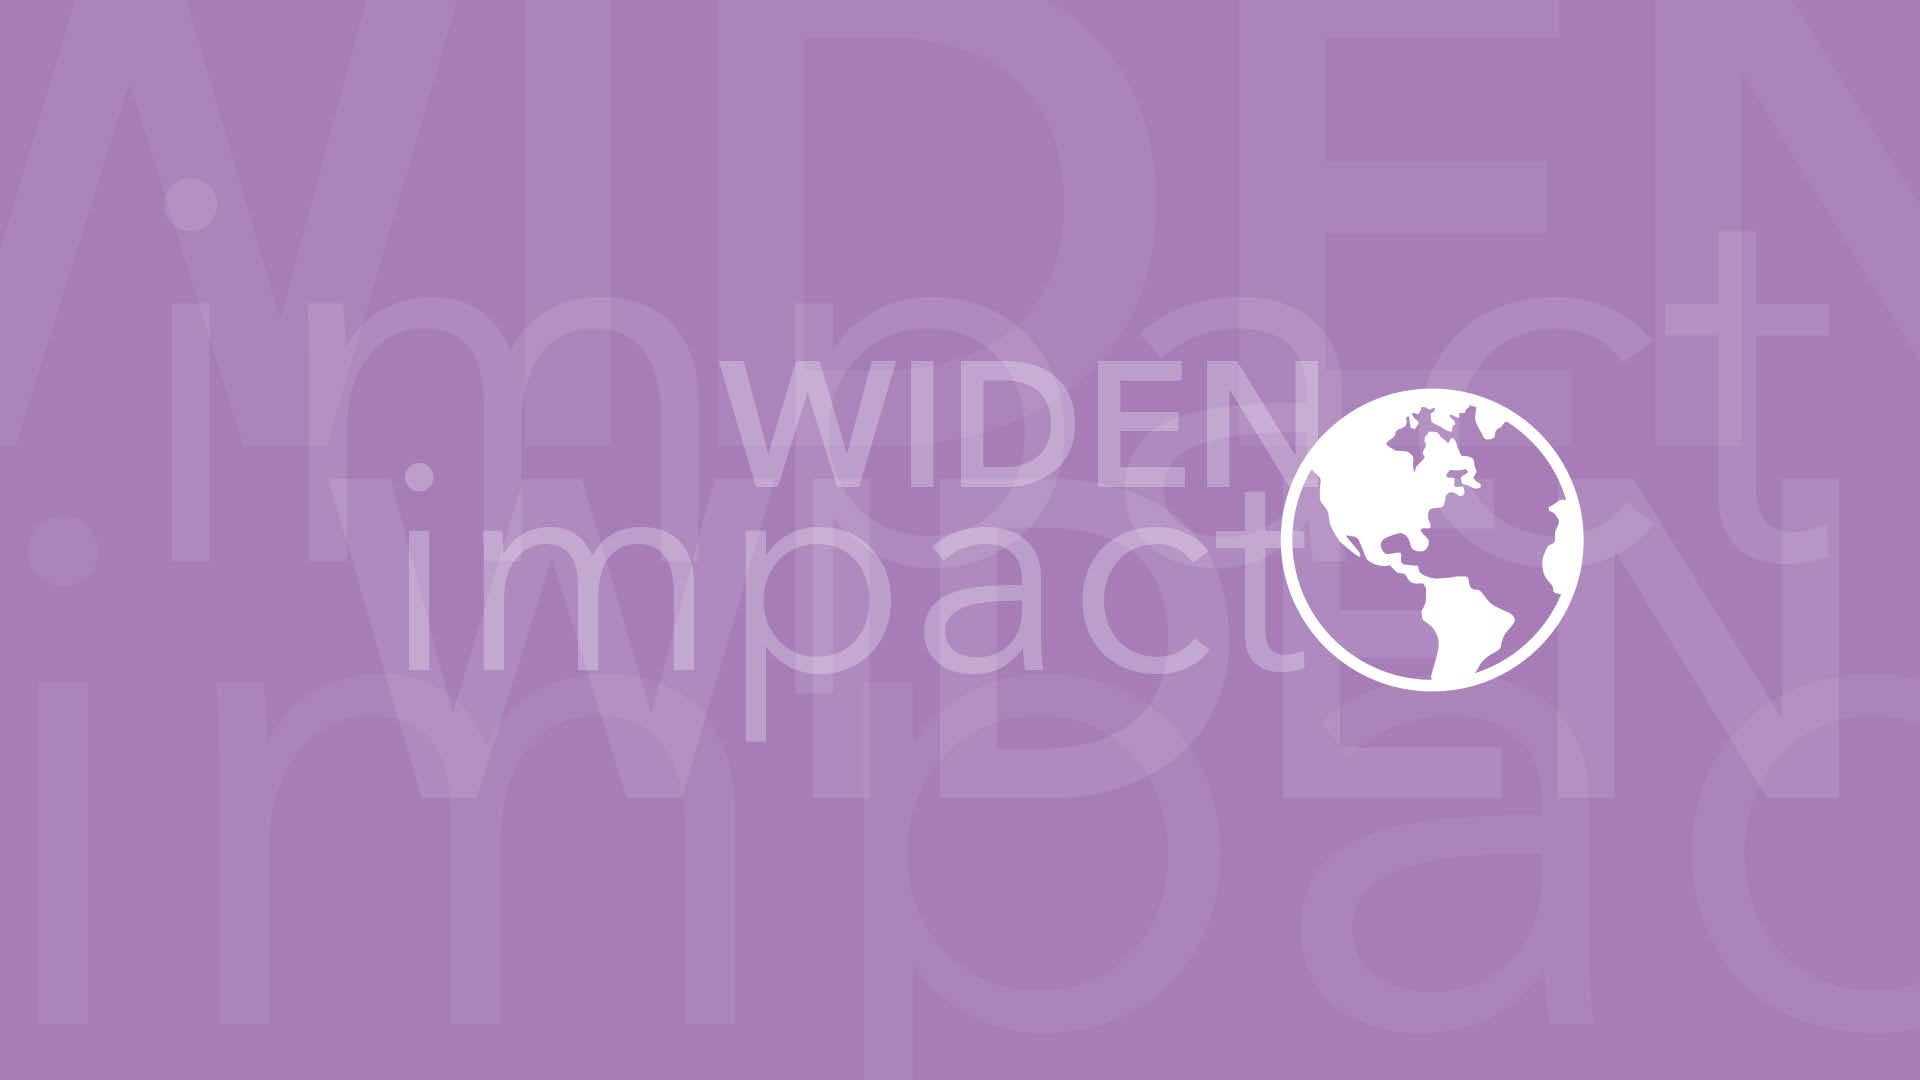 colorful banner showing an icon that represents the theme to Widen the Circle of Impact